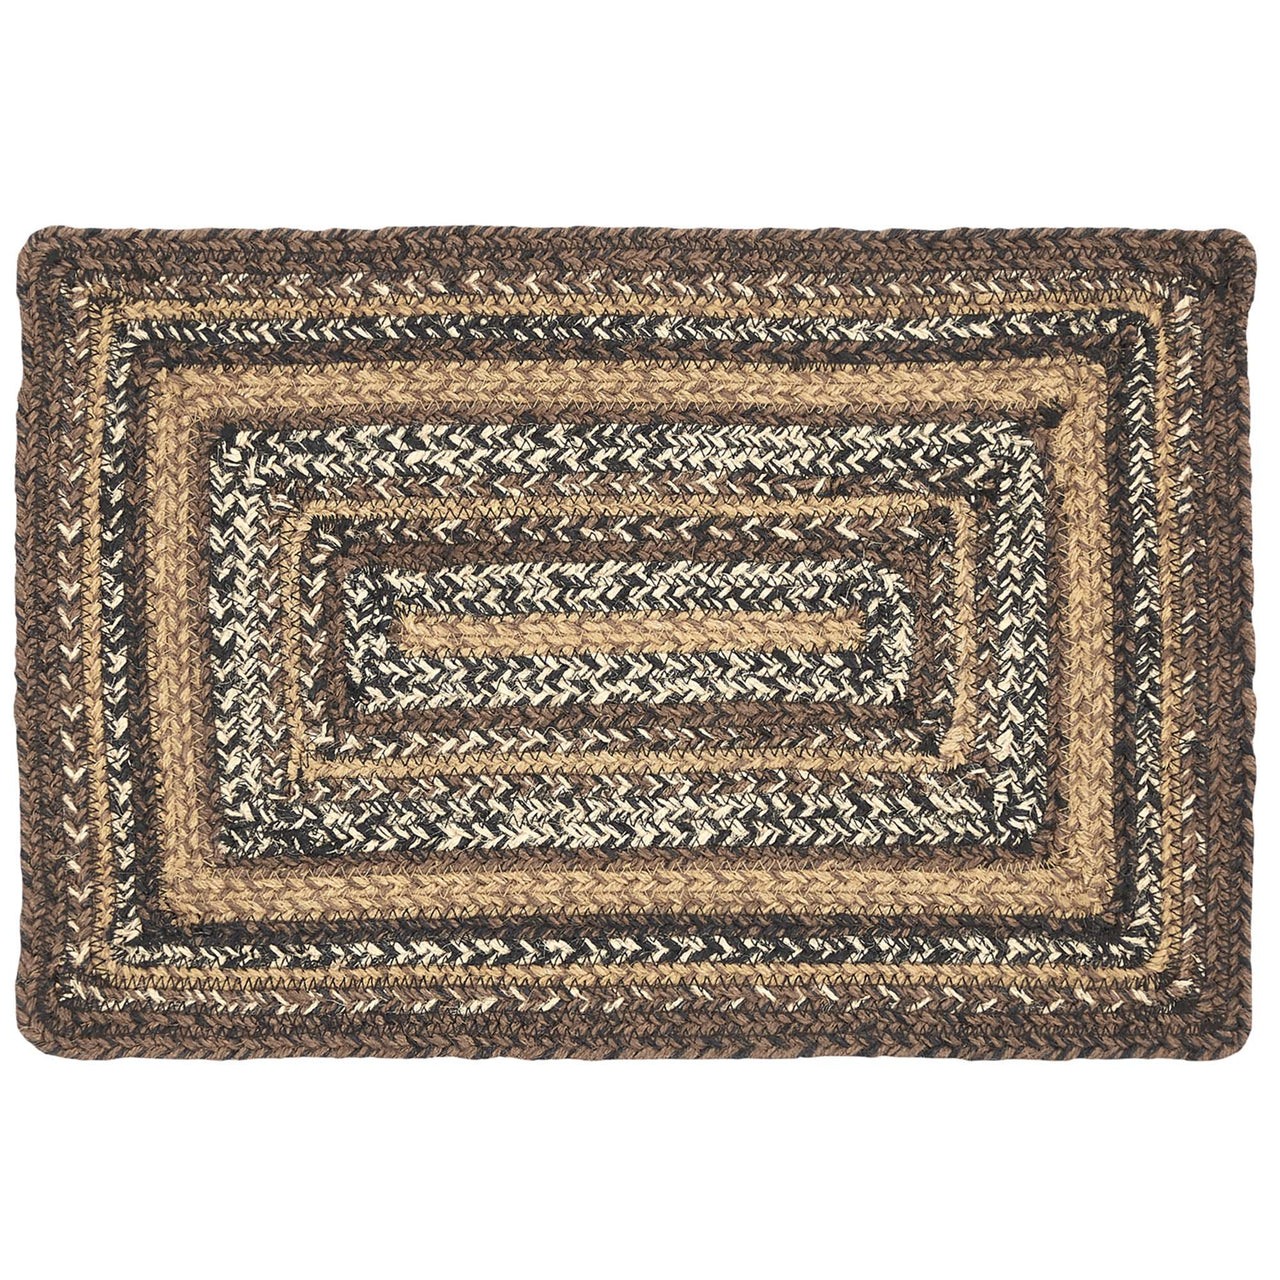 Espresso Jute Braided Rect Placemat 12"x18" VHC Brands